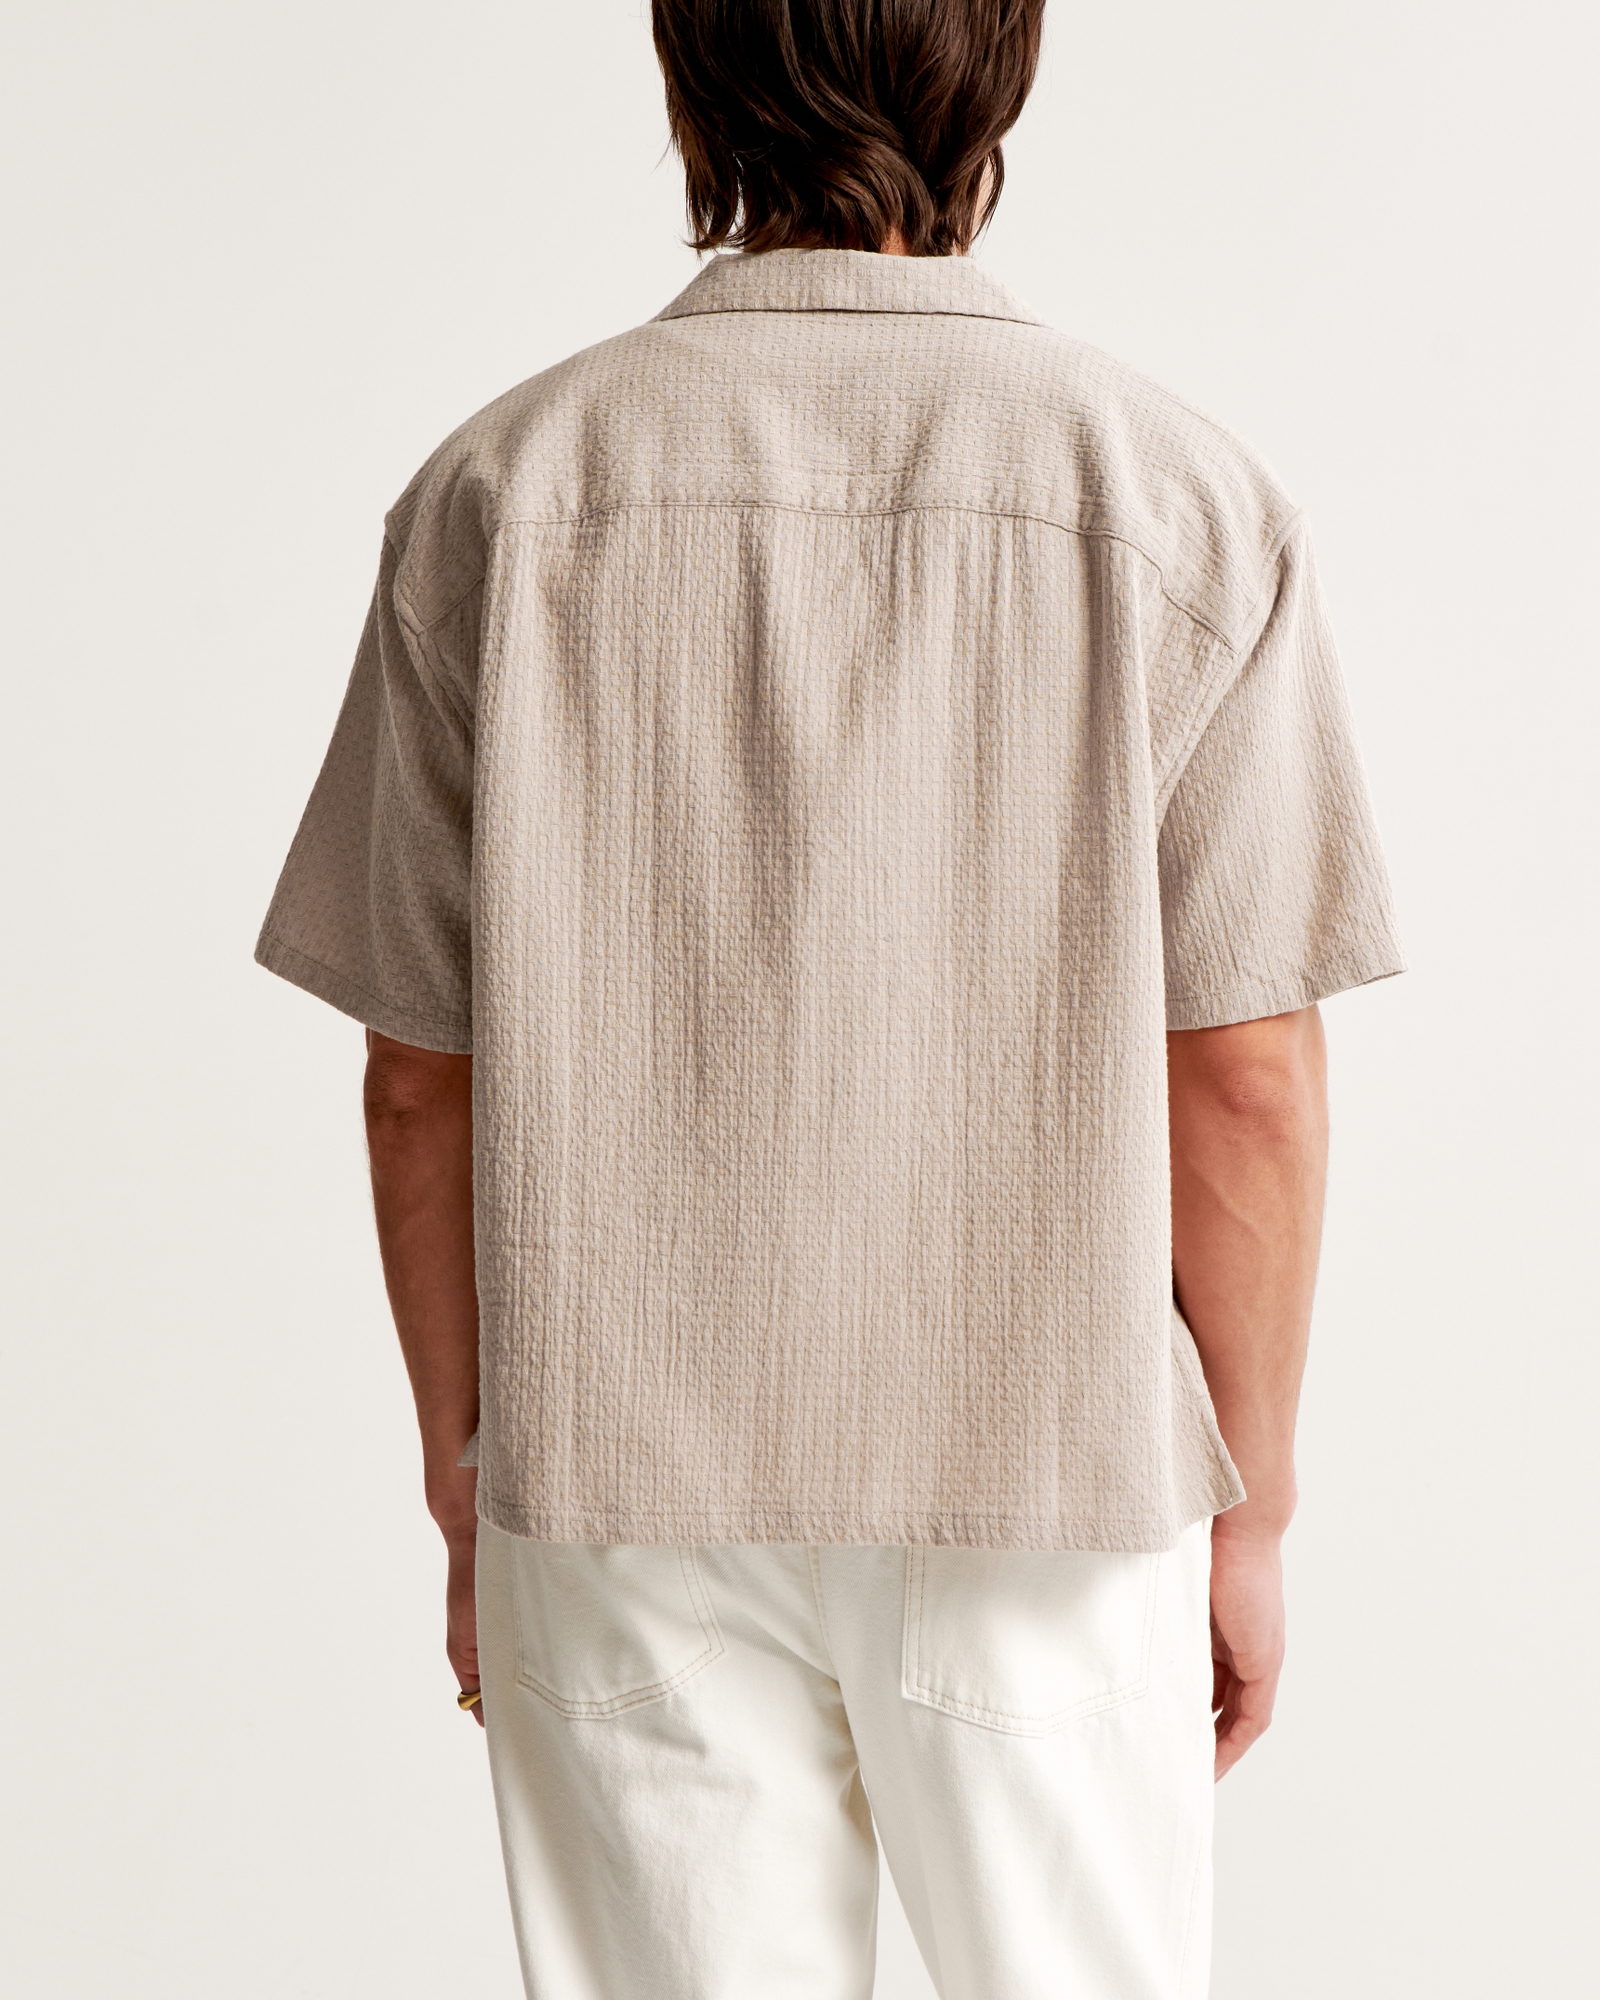 Buy Iconic Textured Resort Shirt with Short Sleeves and Camp Collar